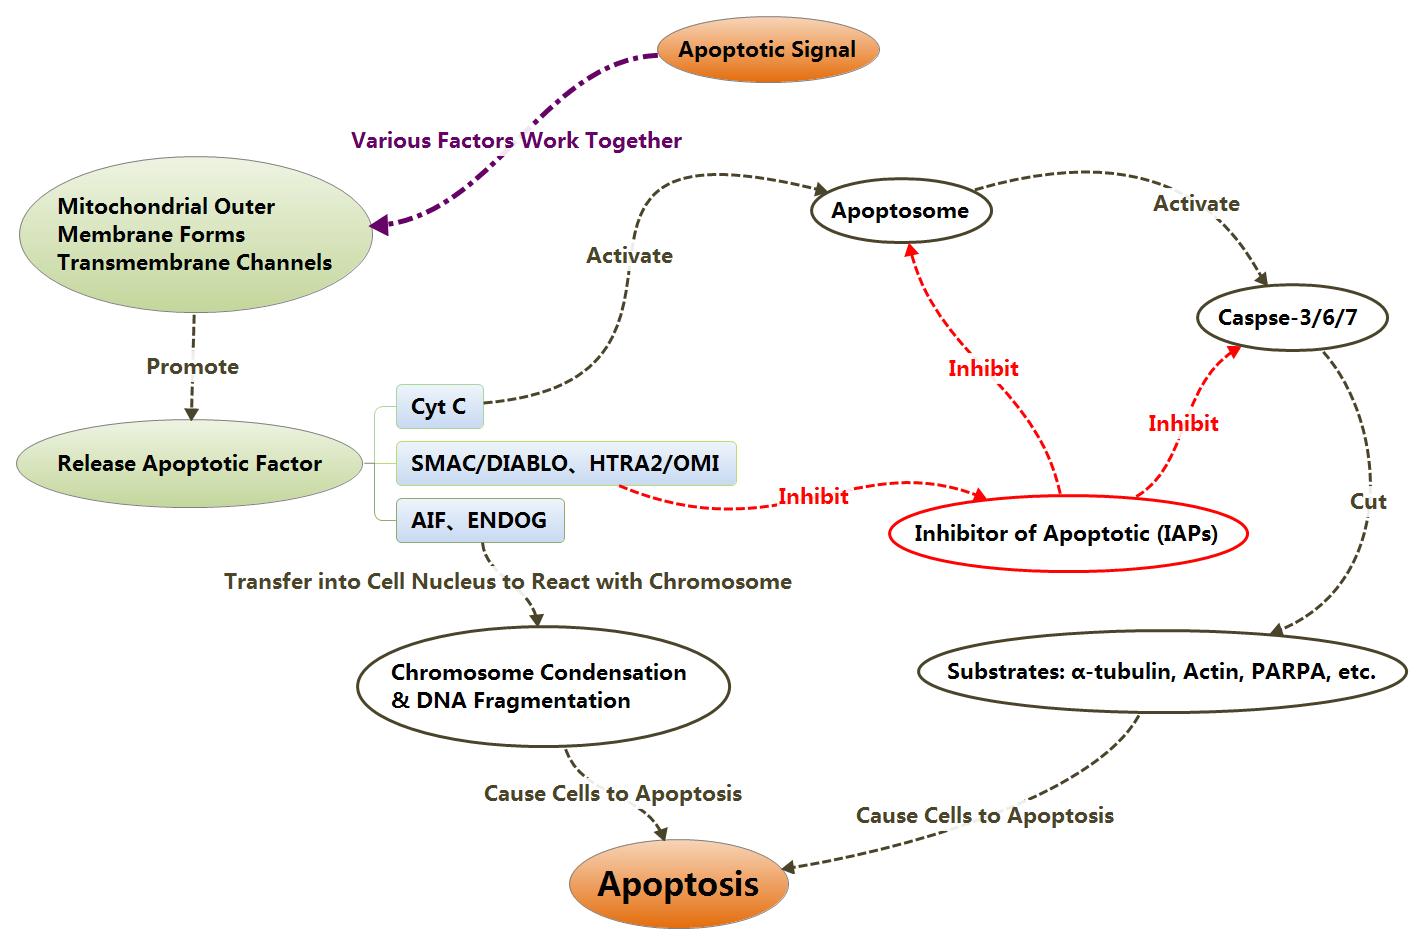 Apoptosis process mediated by mitochondria